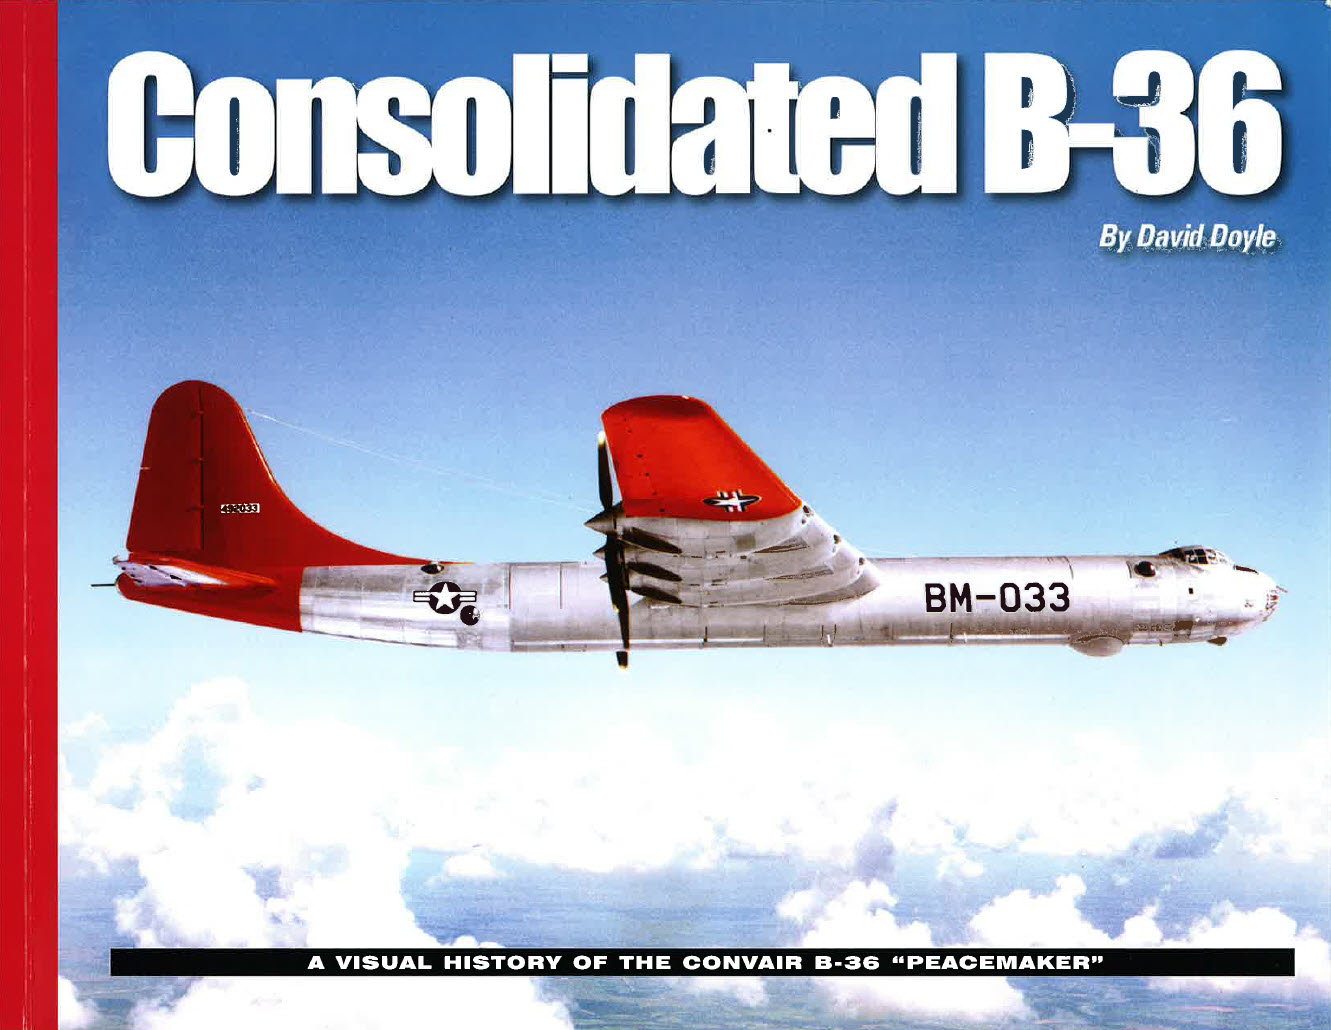 https://reviews.ipmsusa.org/sites/default/files/reviews/consolidated-b-36-visual-history-convair-b-36-peacemaker/ampersandconsolidatedb-36coverfront.jpg